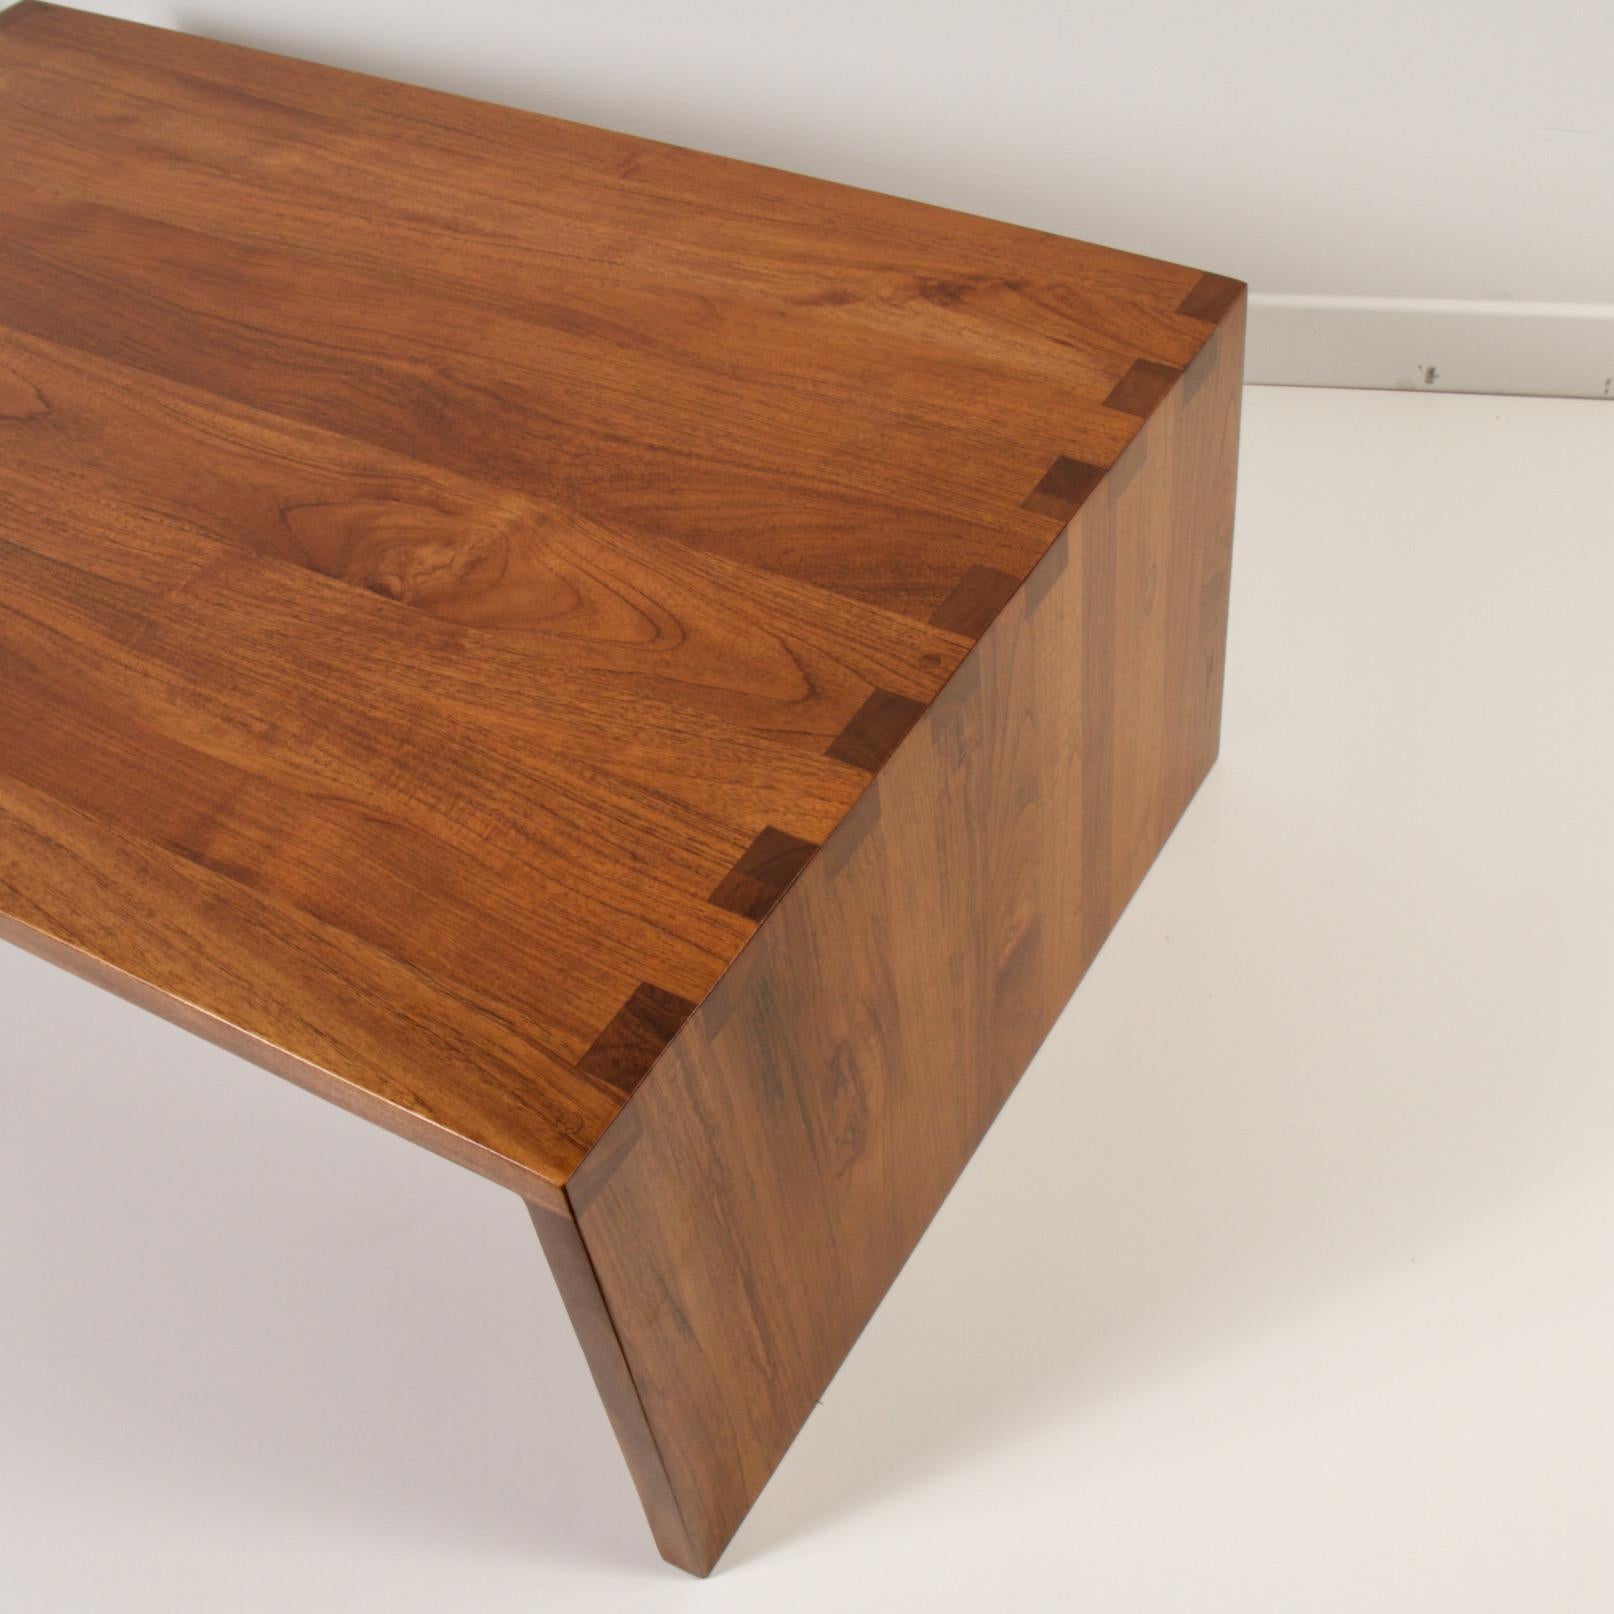 Modern craftsman coffee table with dramatic oversized dovetailed joints. Solid walnut construction with a side section for magazines, laptops or remotes.